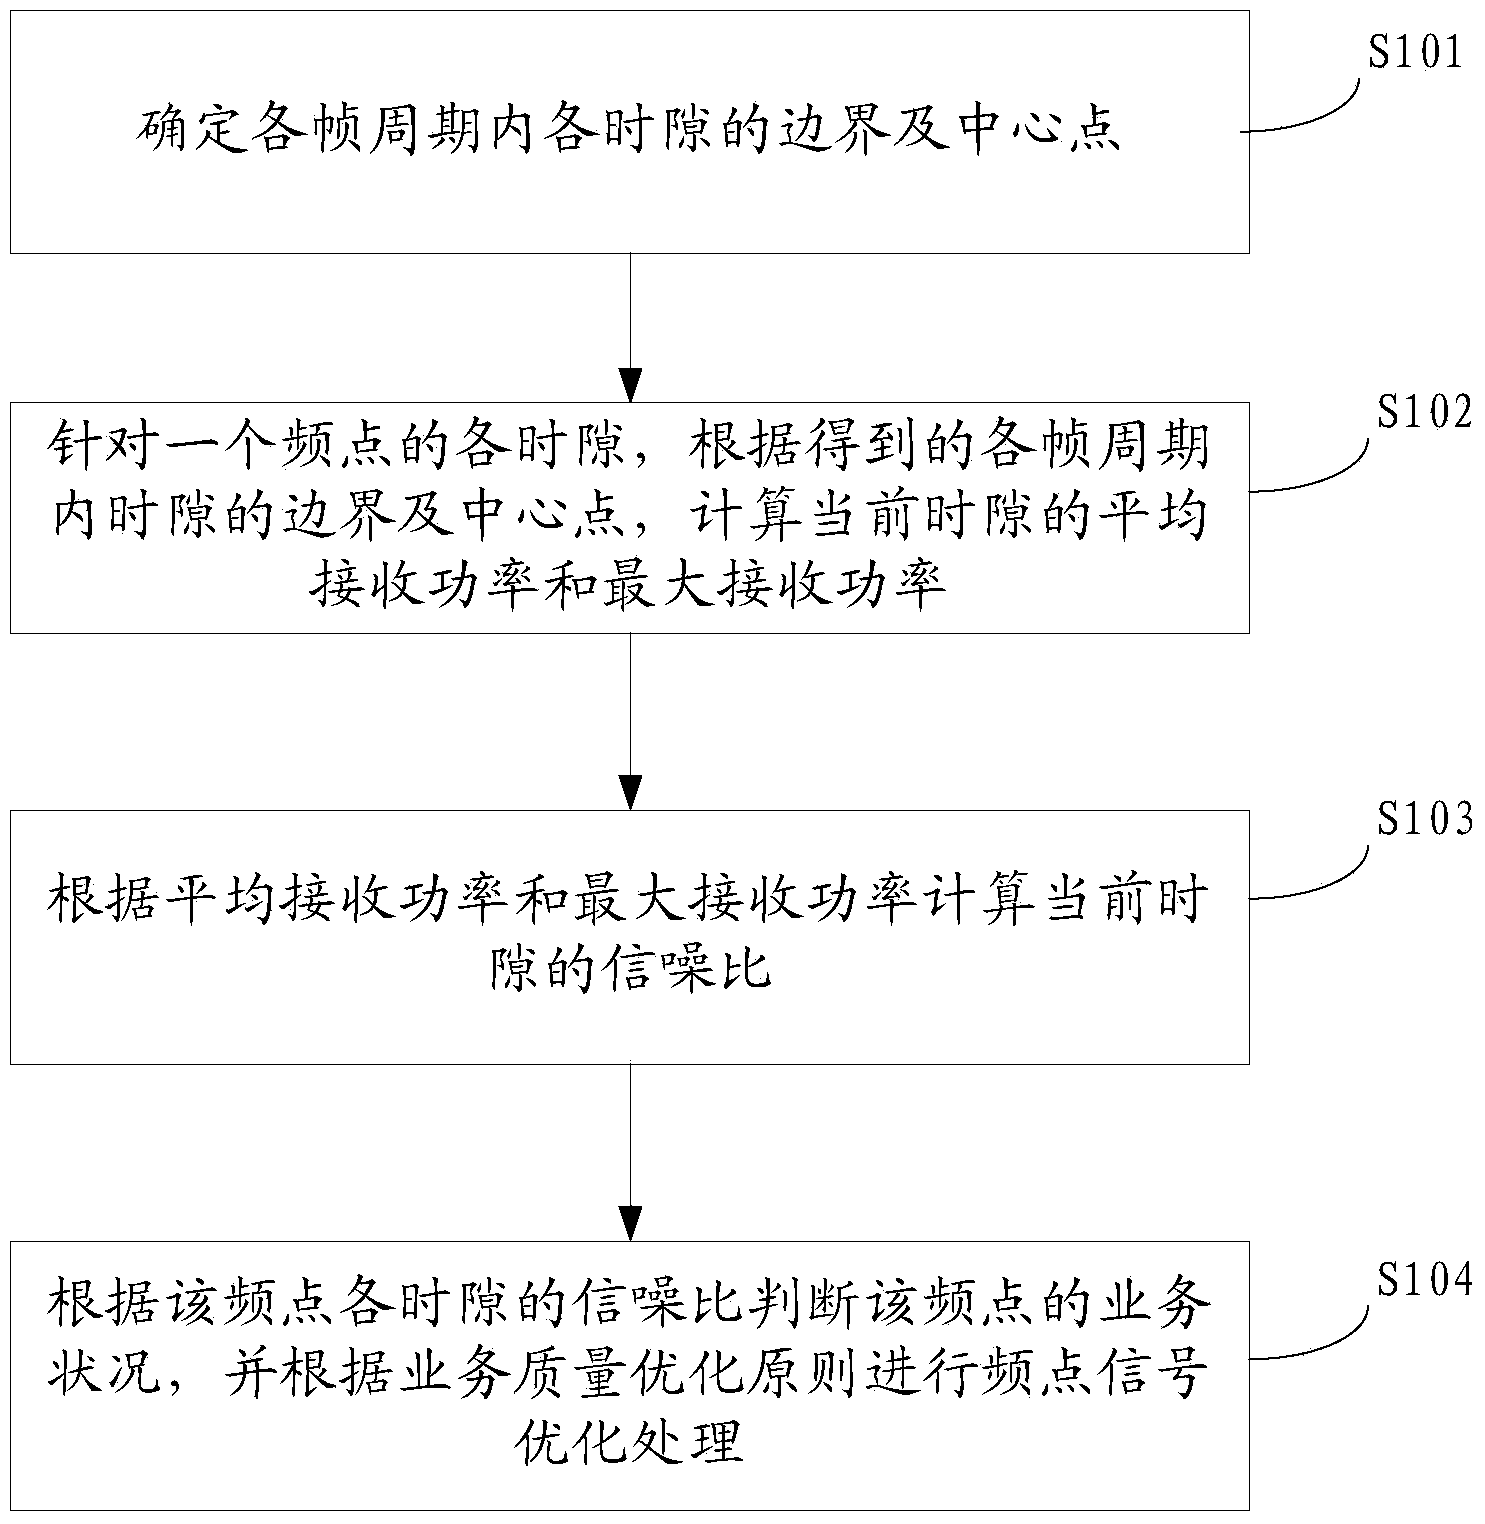 Method and system for carrying out signal optimization based on carrier-to-interference ratio (C/I)